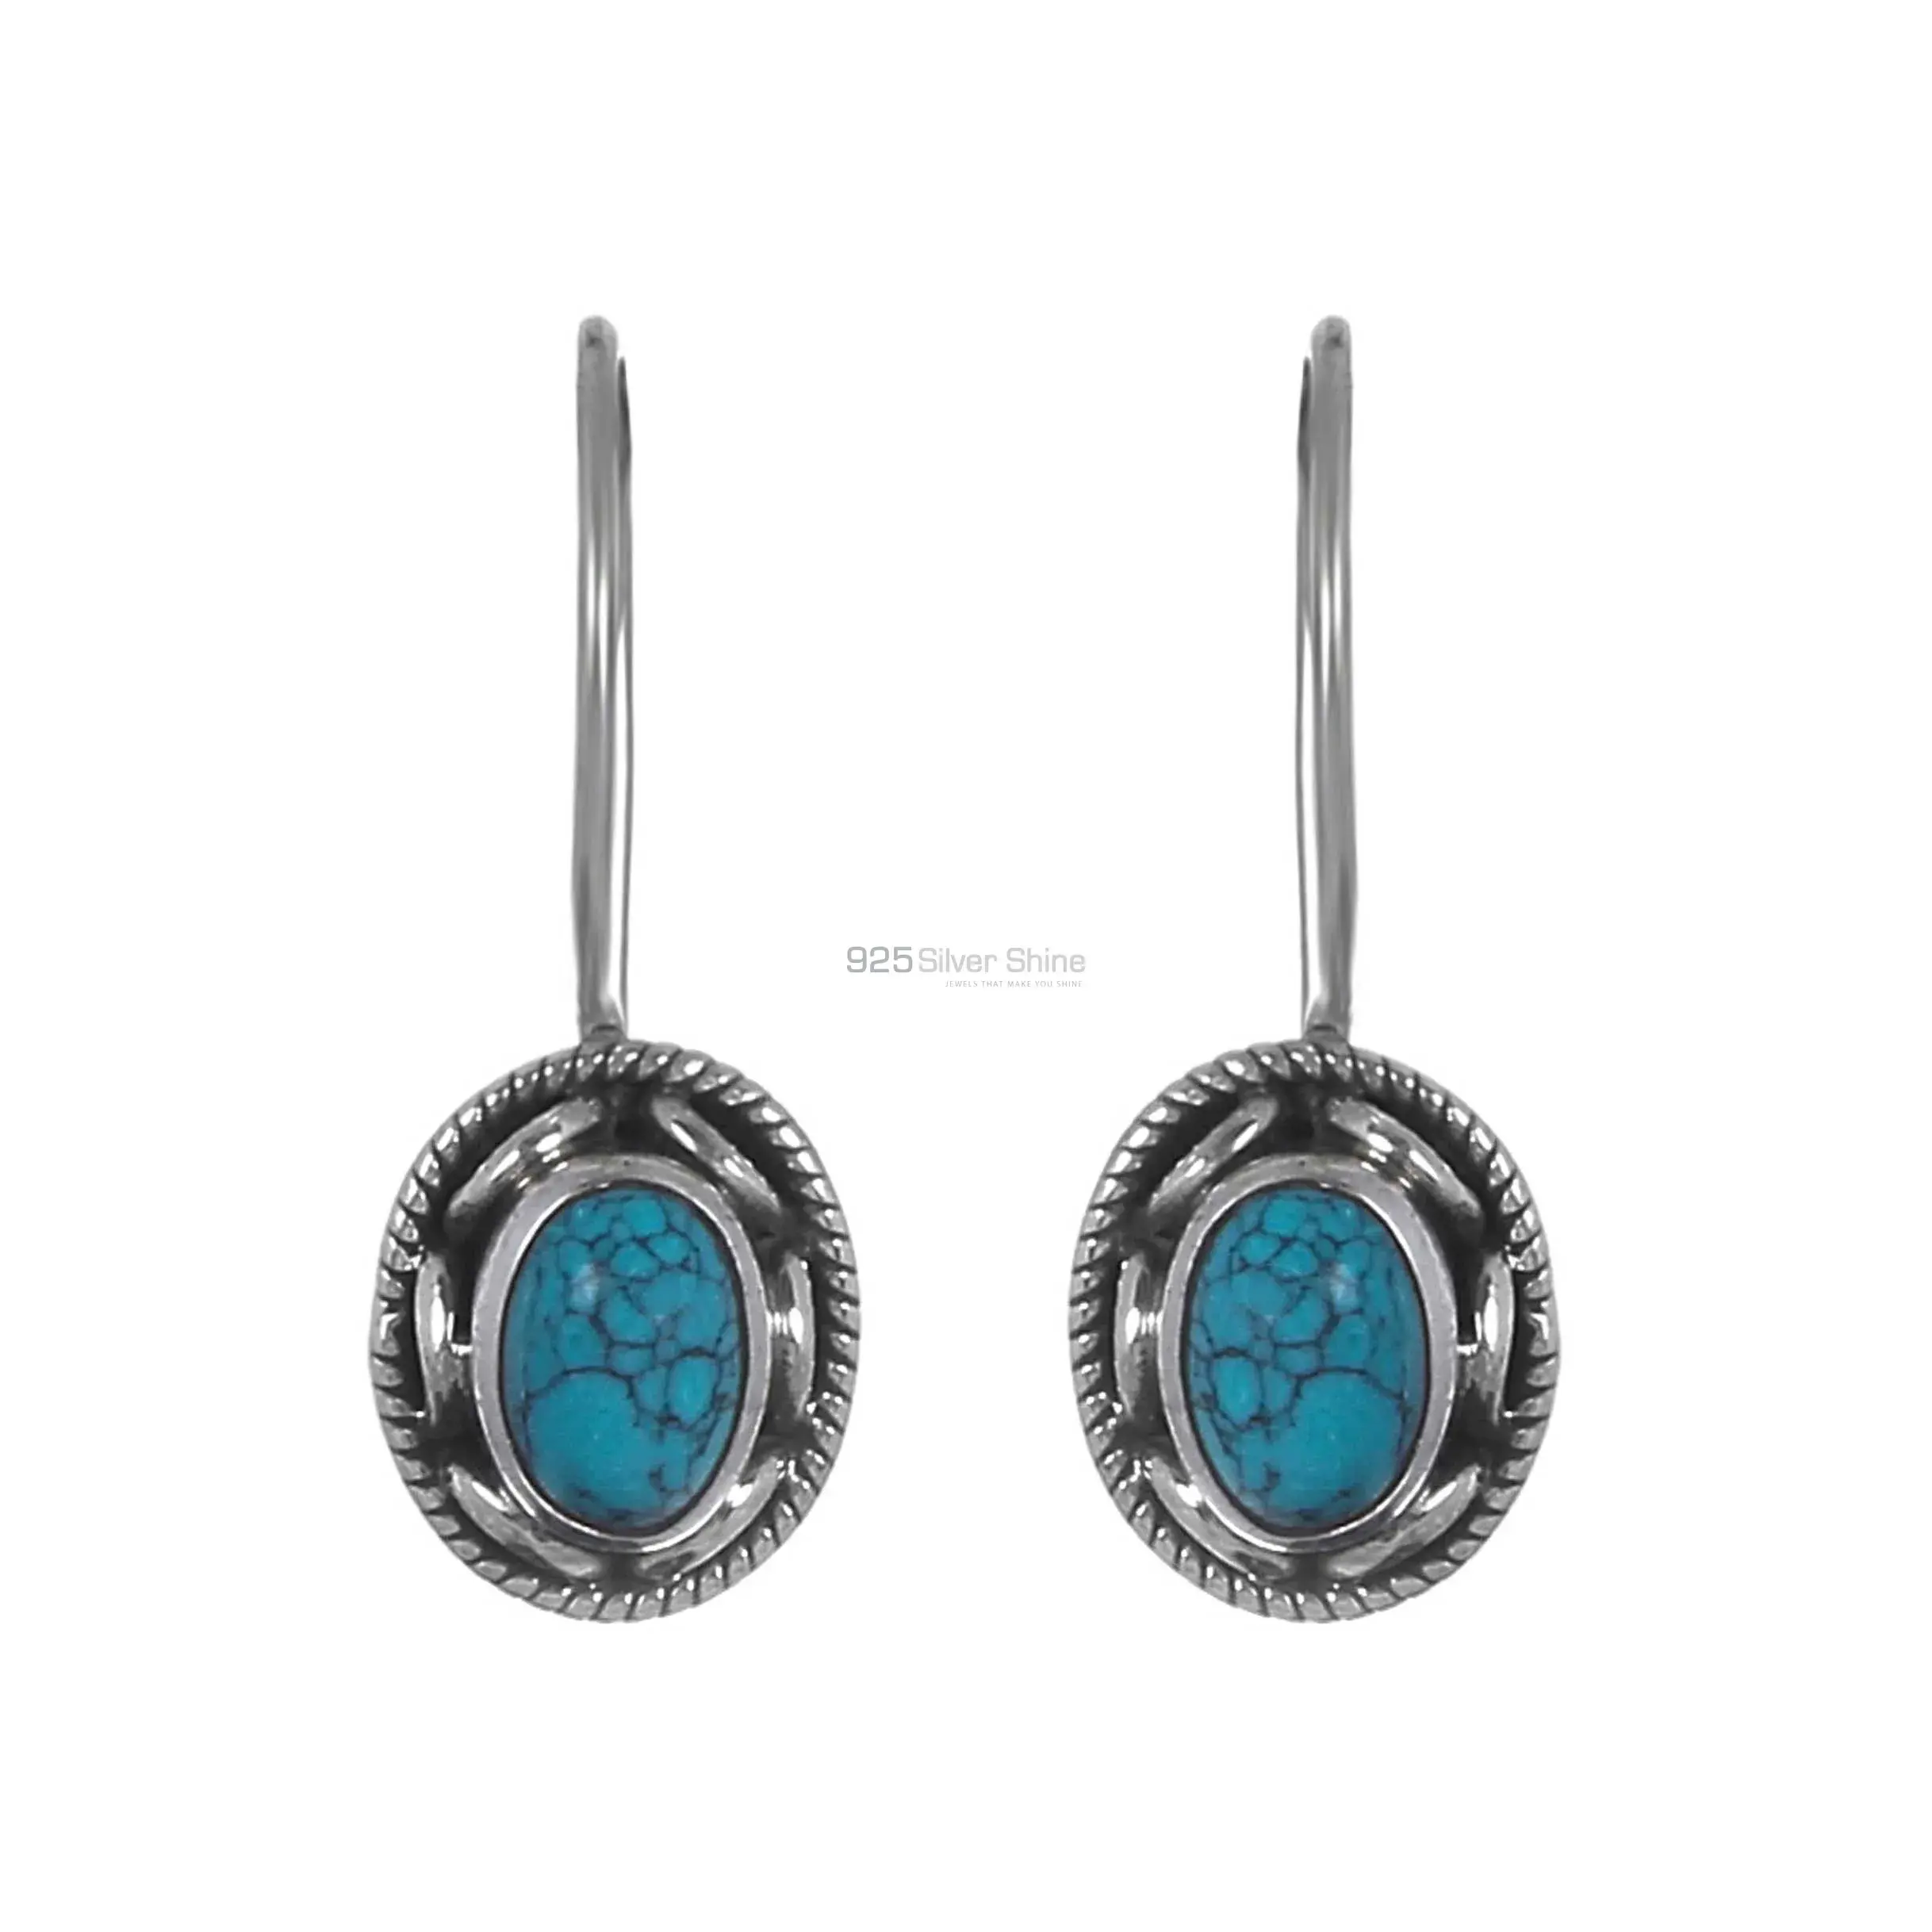 Wholesale Sterling Silver Earring In Natural Turquoise Gemstone Jewelry 925SE195